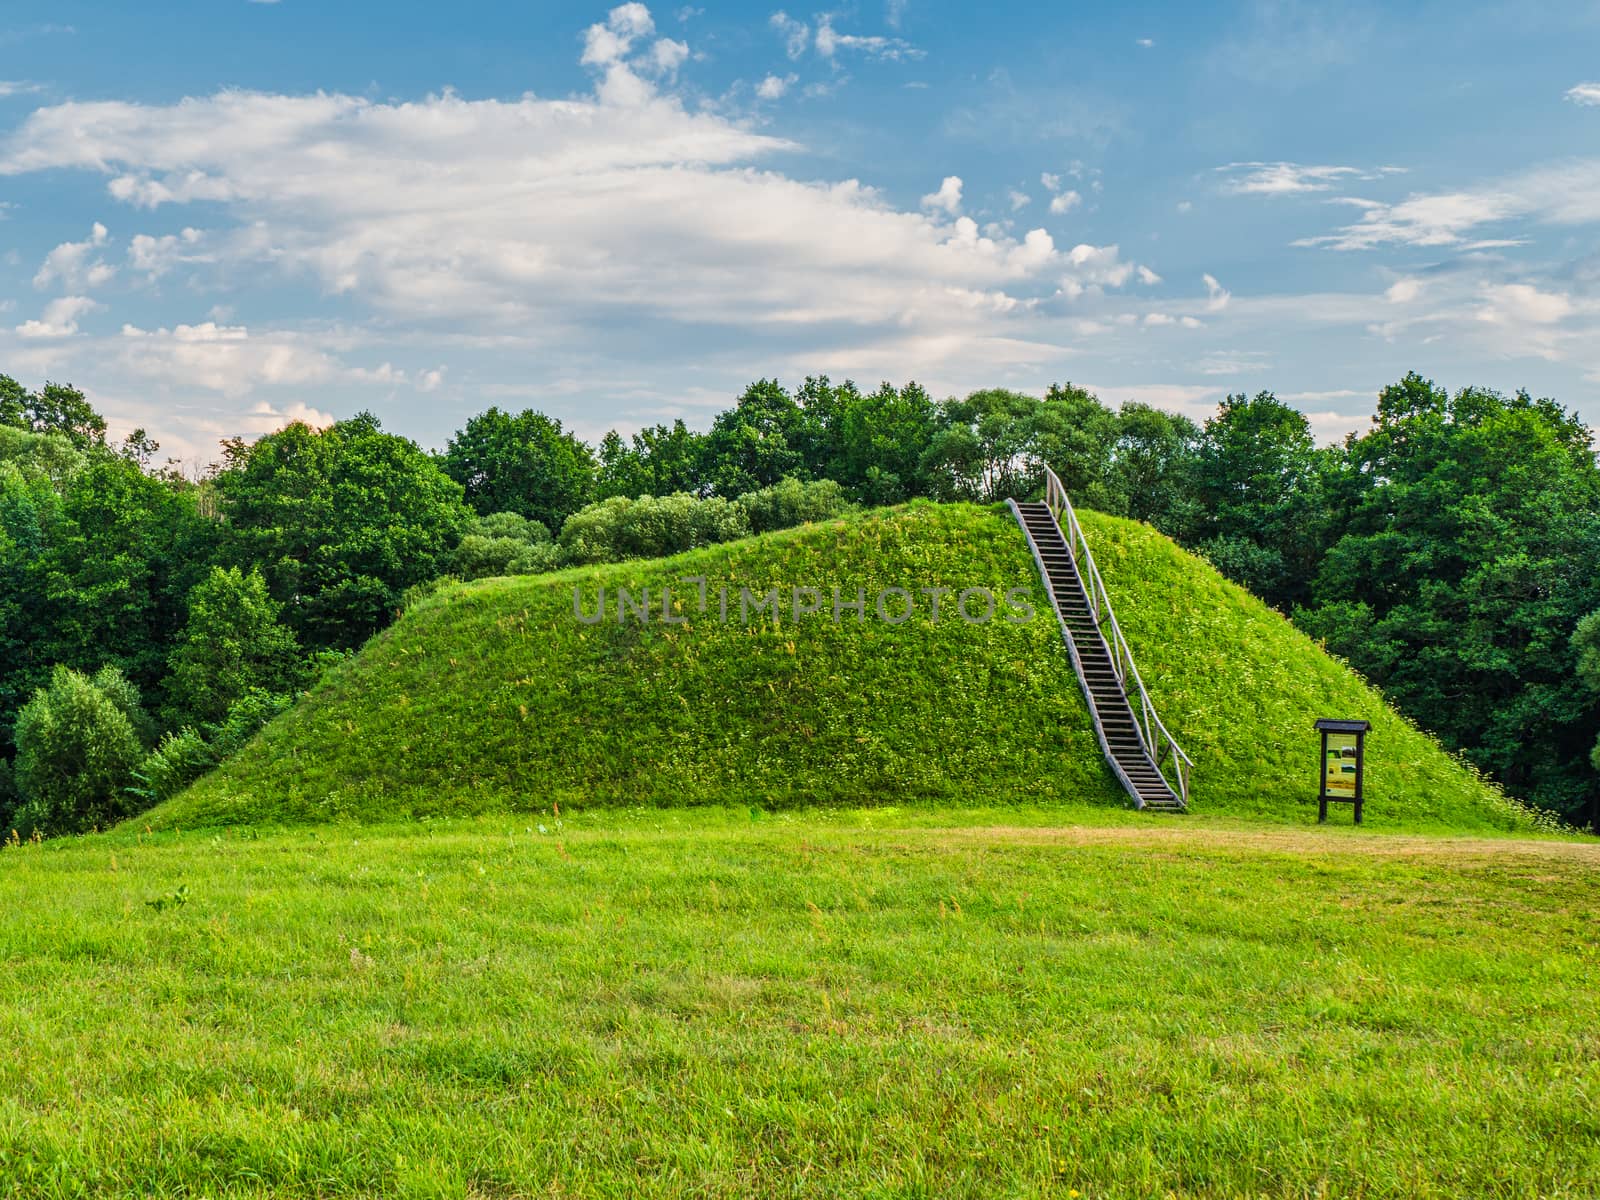 Wooden Stairs to The Top of The Mound. Historic Burial Mound, Lithuania.